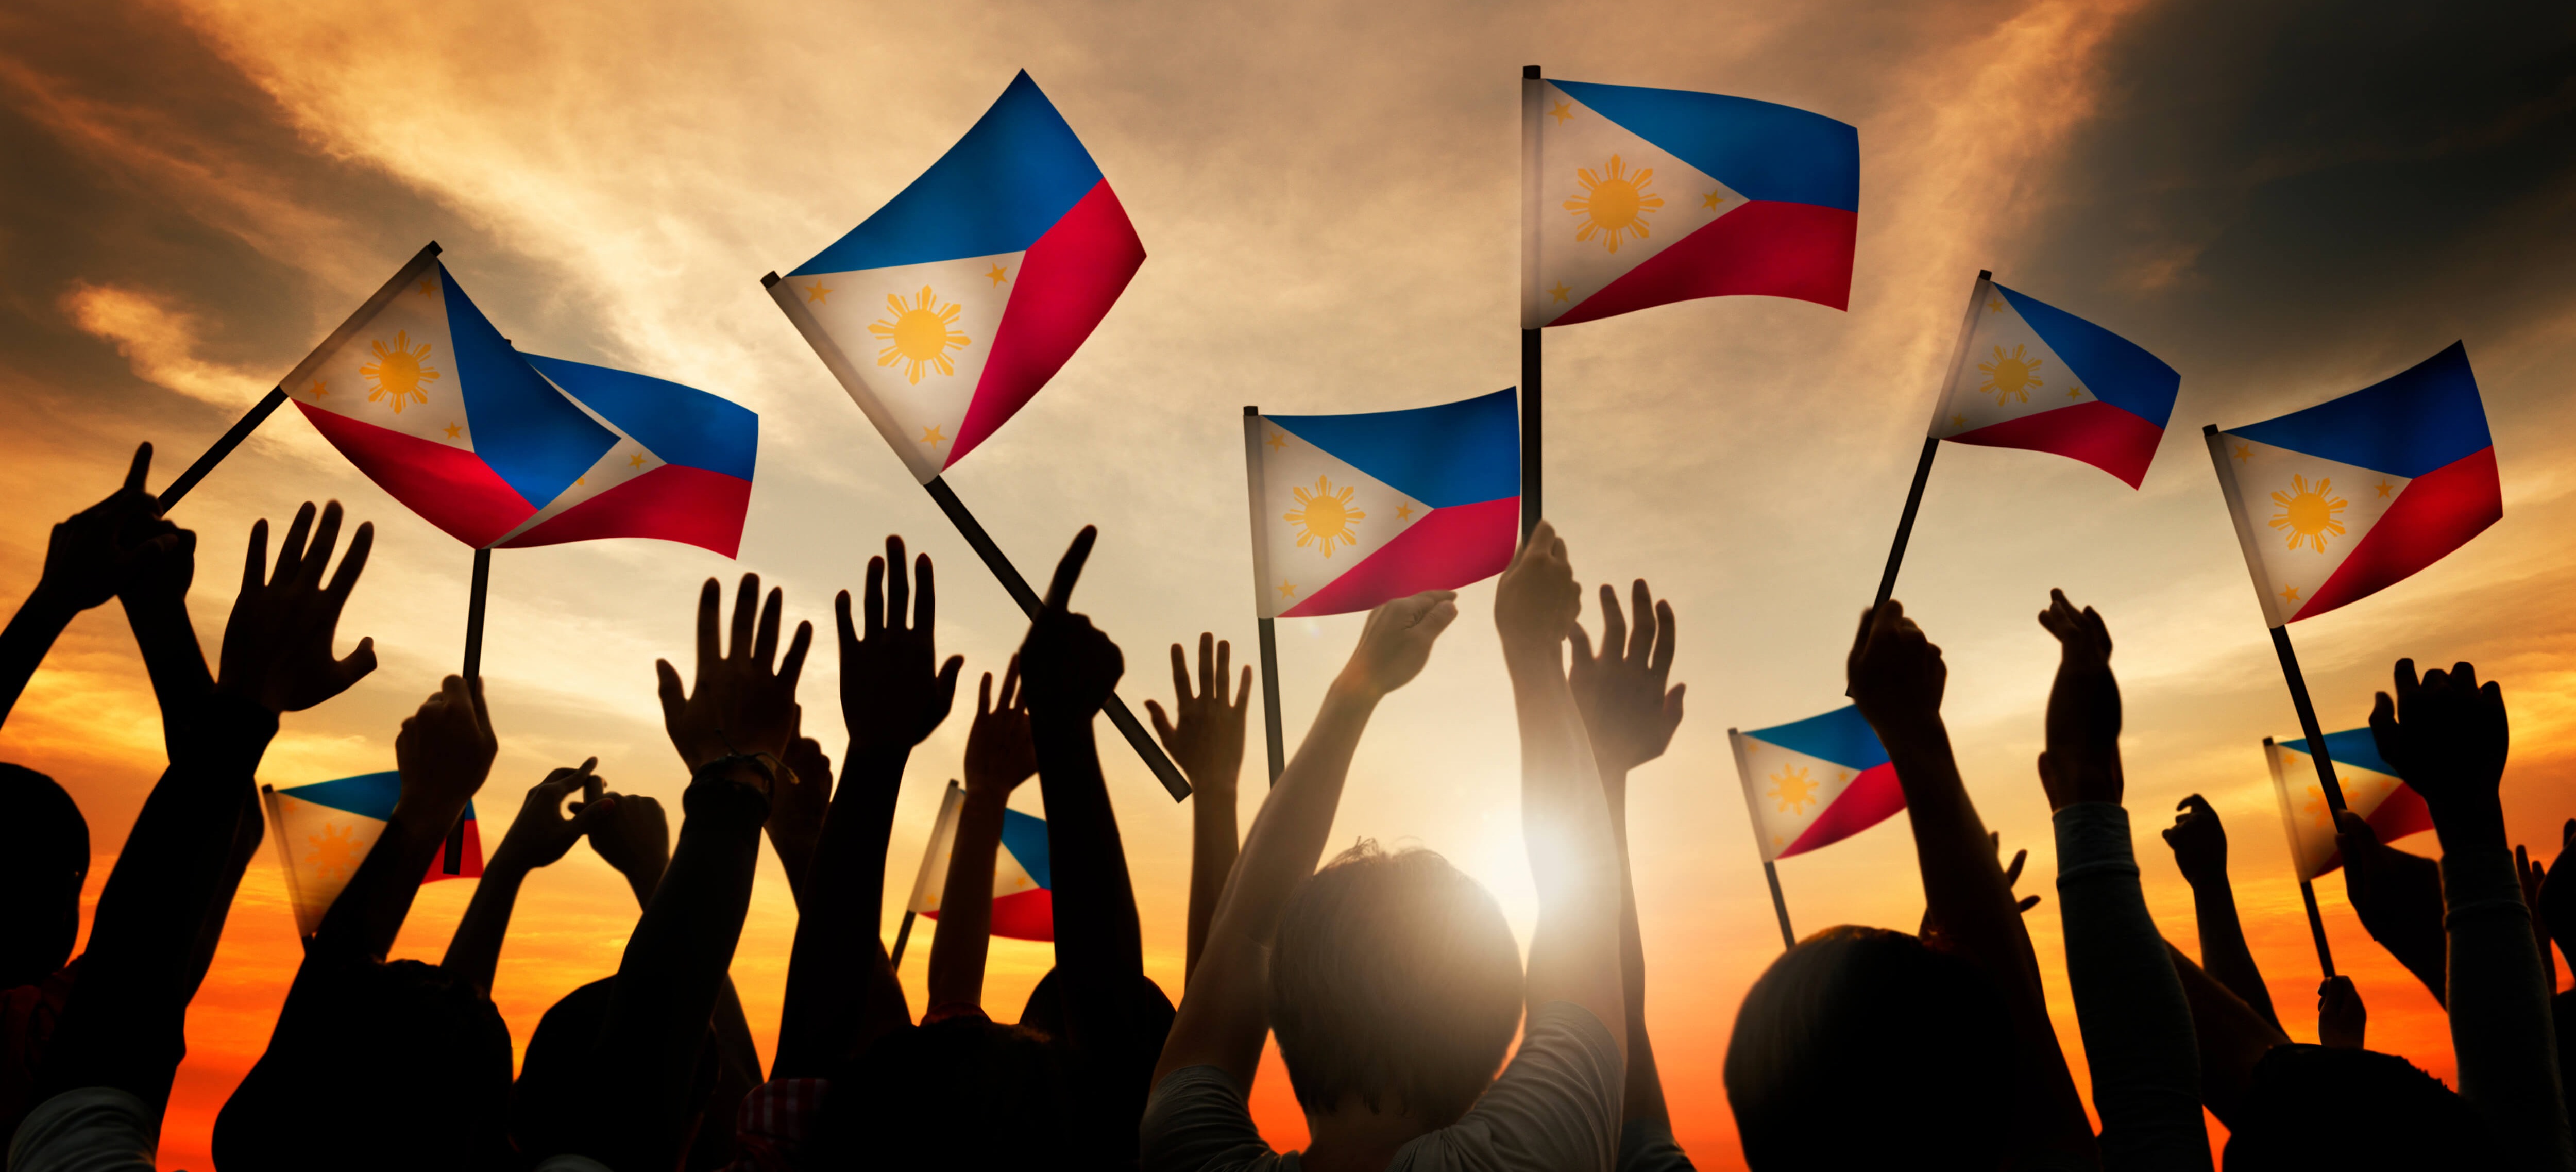 A crowd's silhouetted hands hold up Phillipines flags against a golden sunset